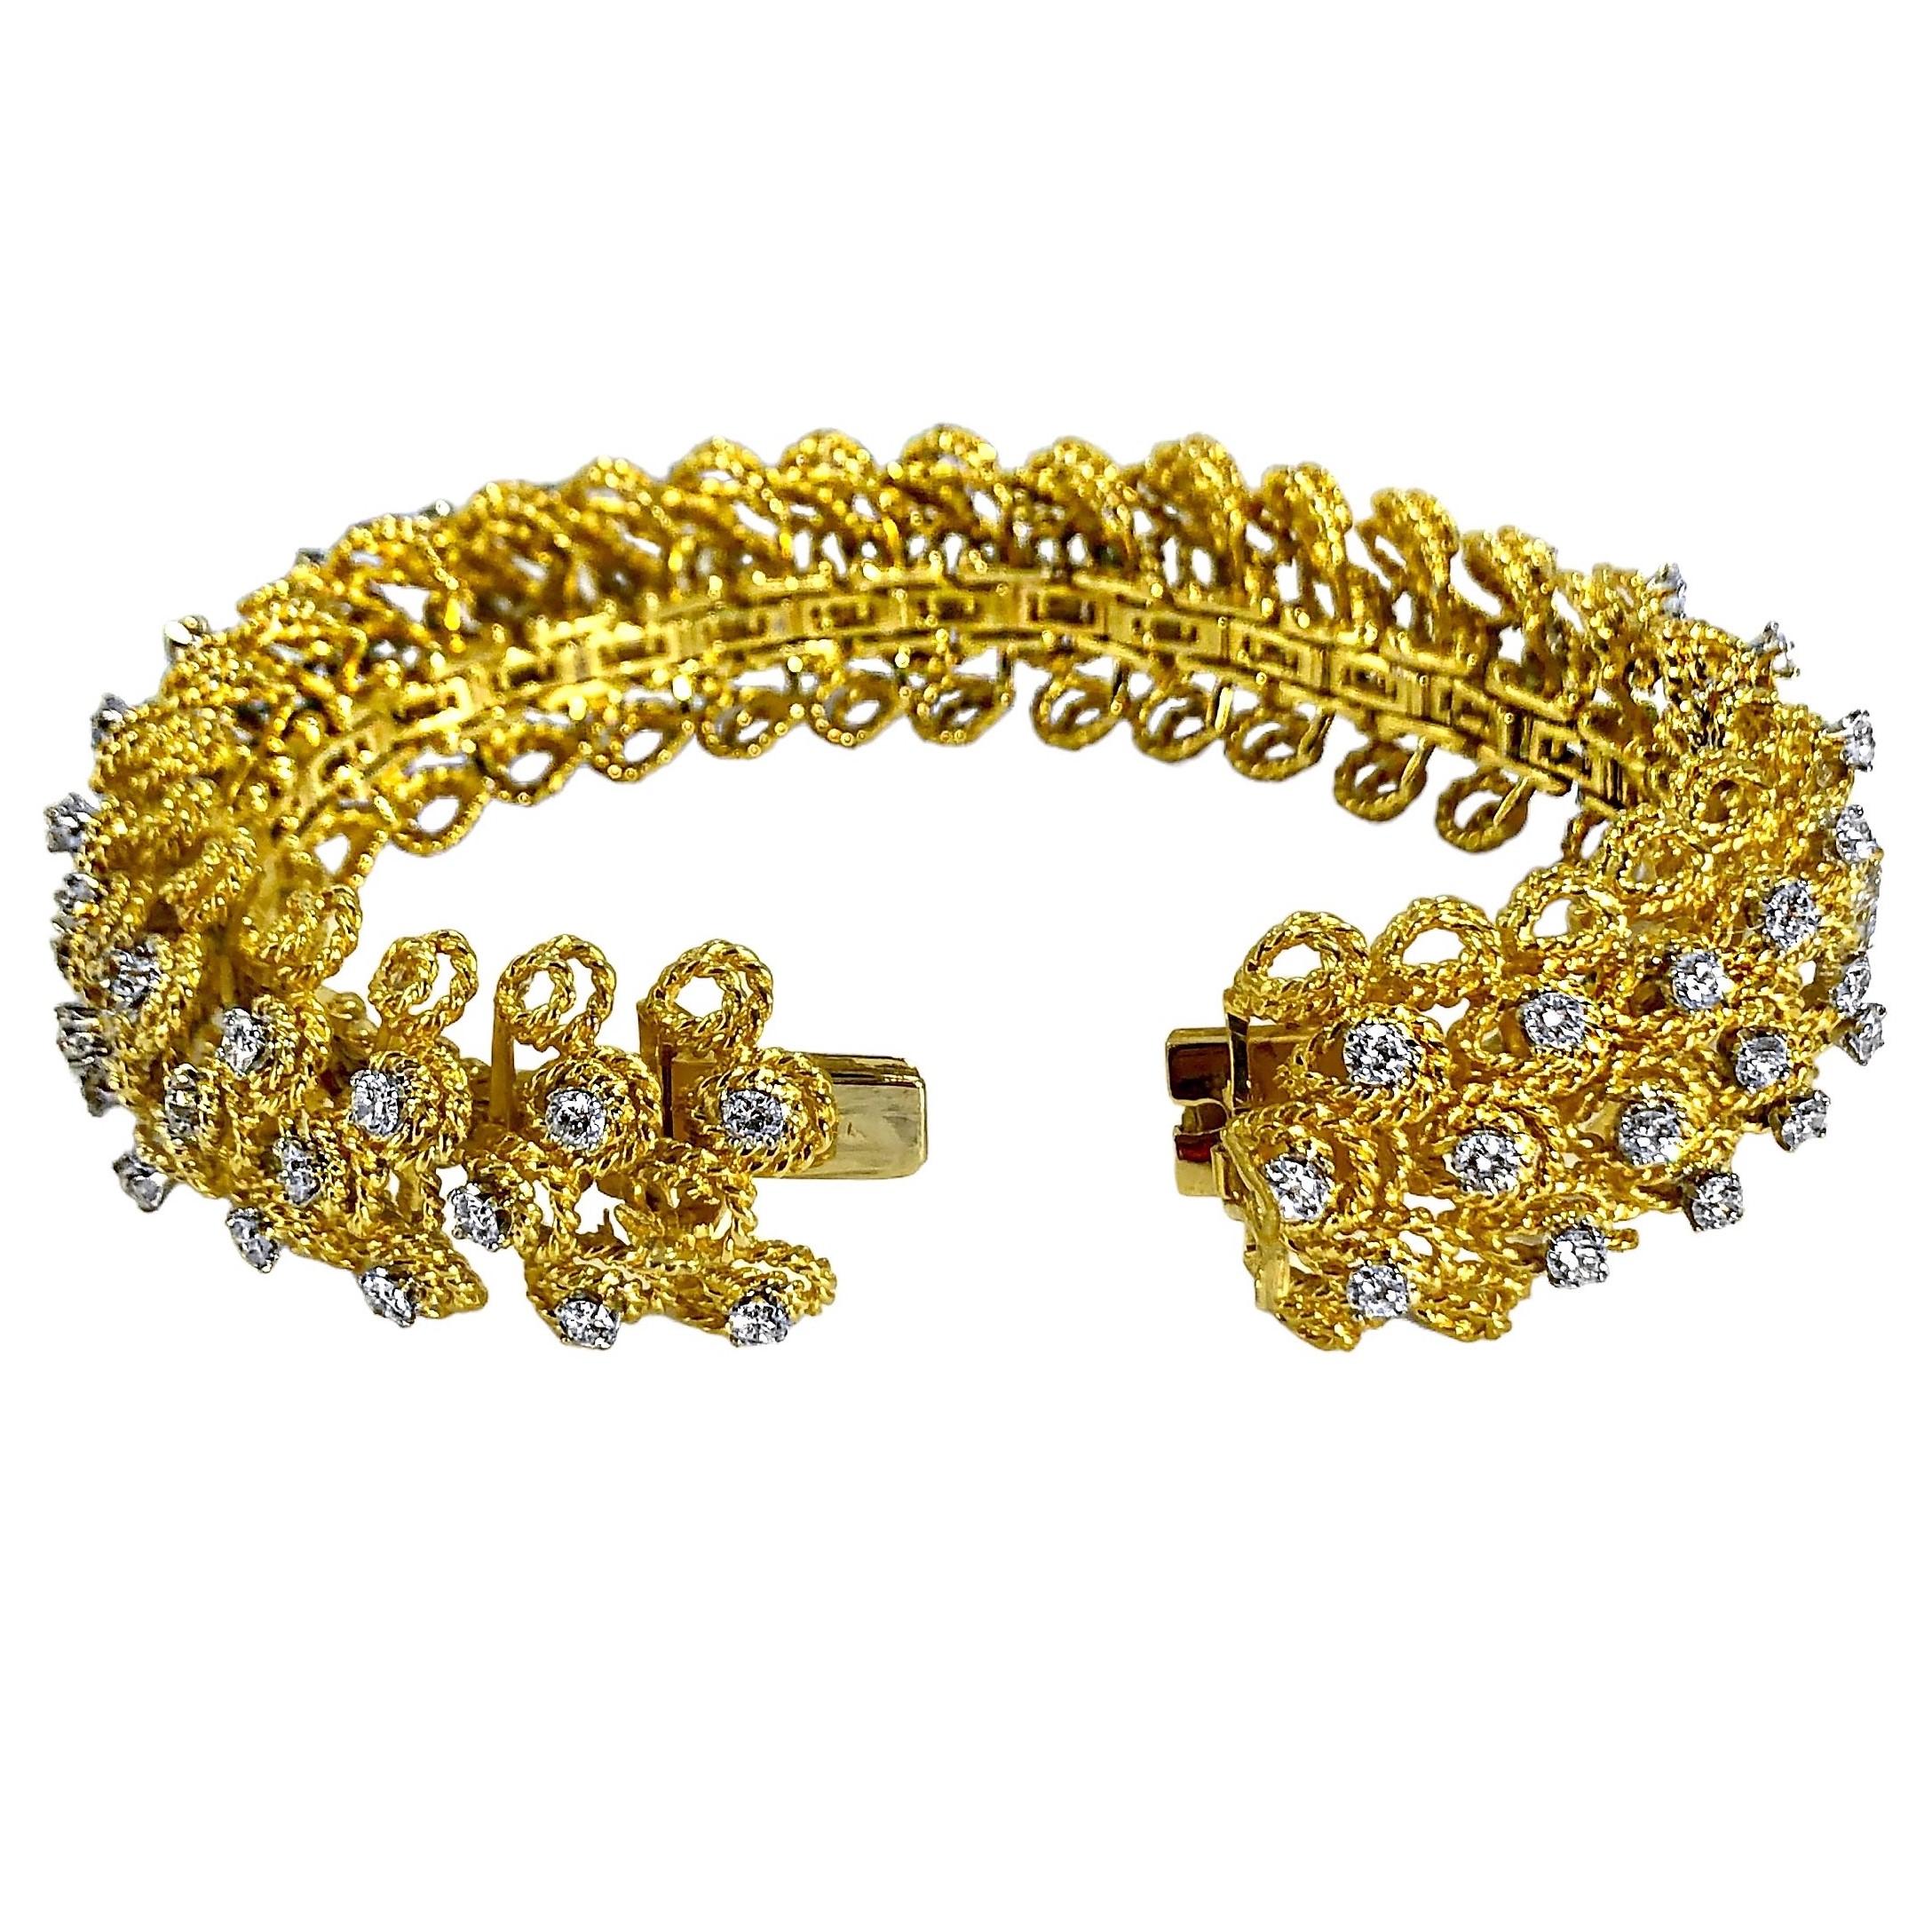 This bold and wonderful 18K yellow gold and diamond bombe bracelet is pure American in style. Every link is composed of multi level tear drop shaped links made of twisted wire, five across.  The center of the bracelet is set with three rows of